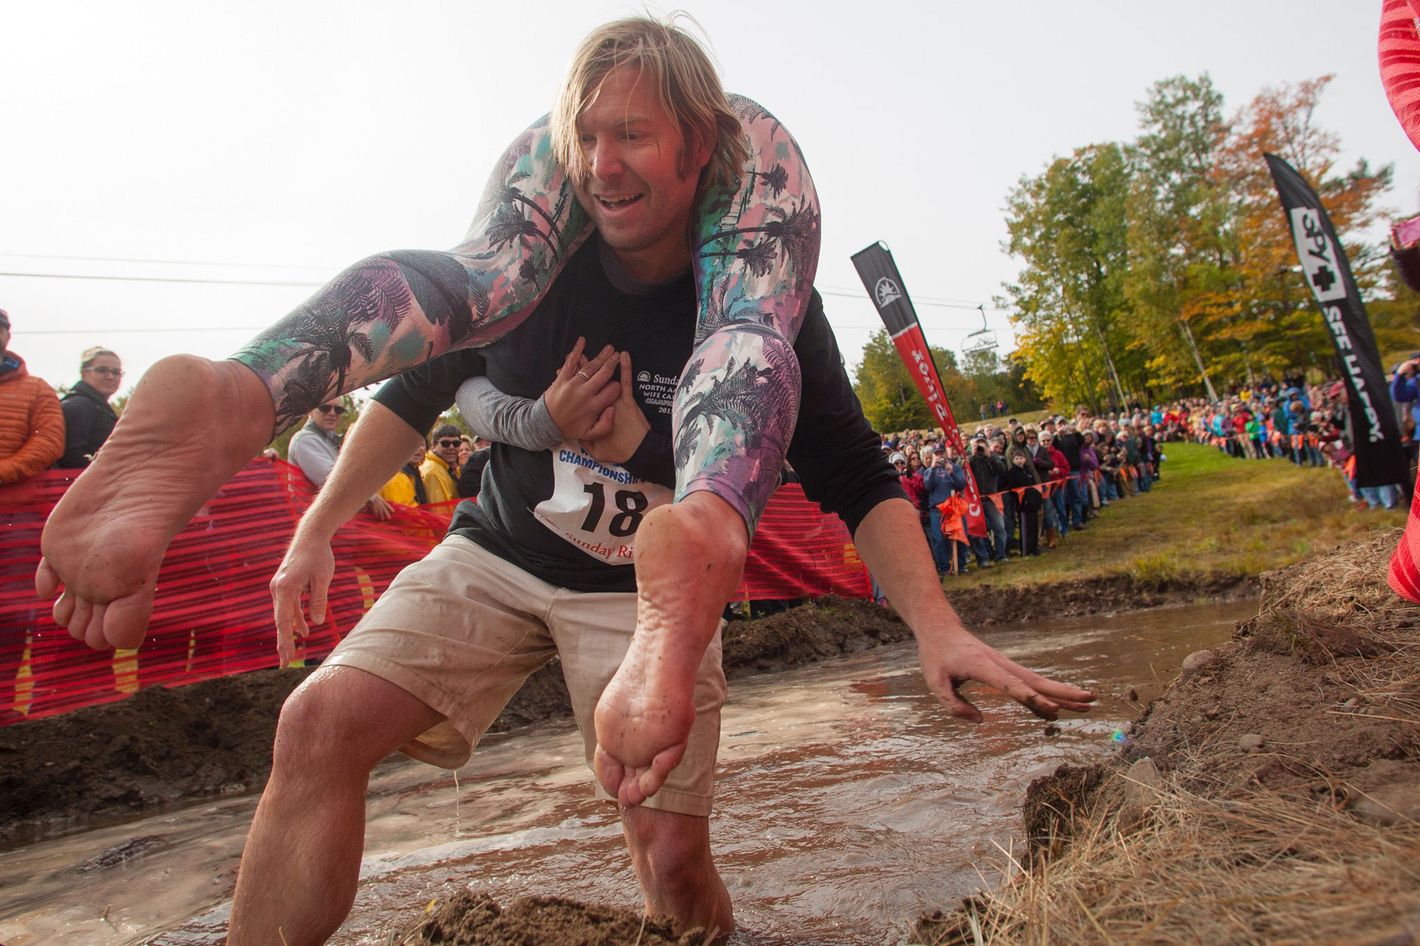 Now Introducing The Finnish Sport of Wife-Carrying